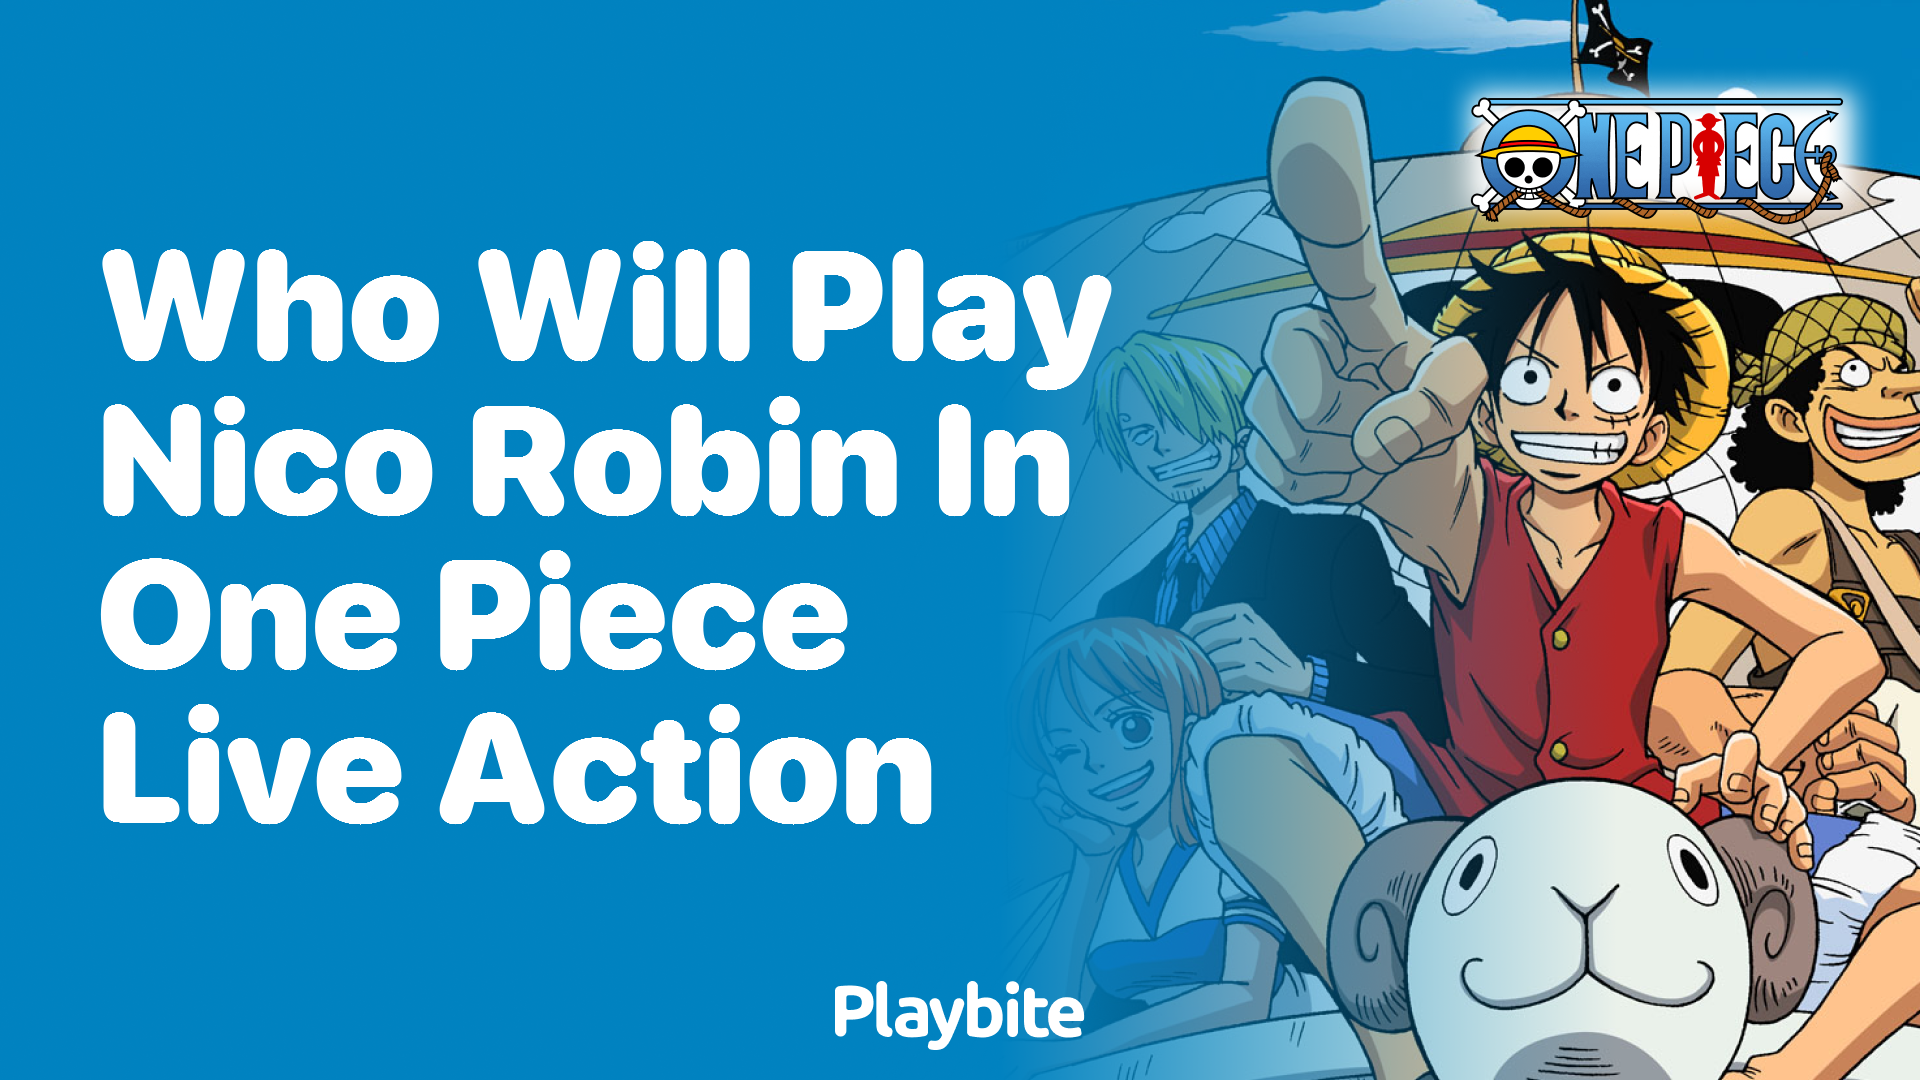 Who Will Play Nico Robin in the One Piece Live Action?